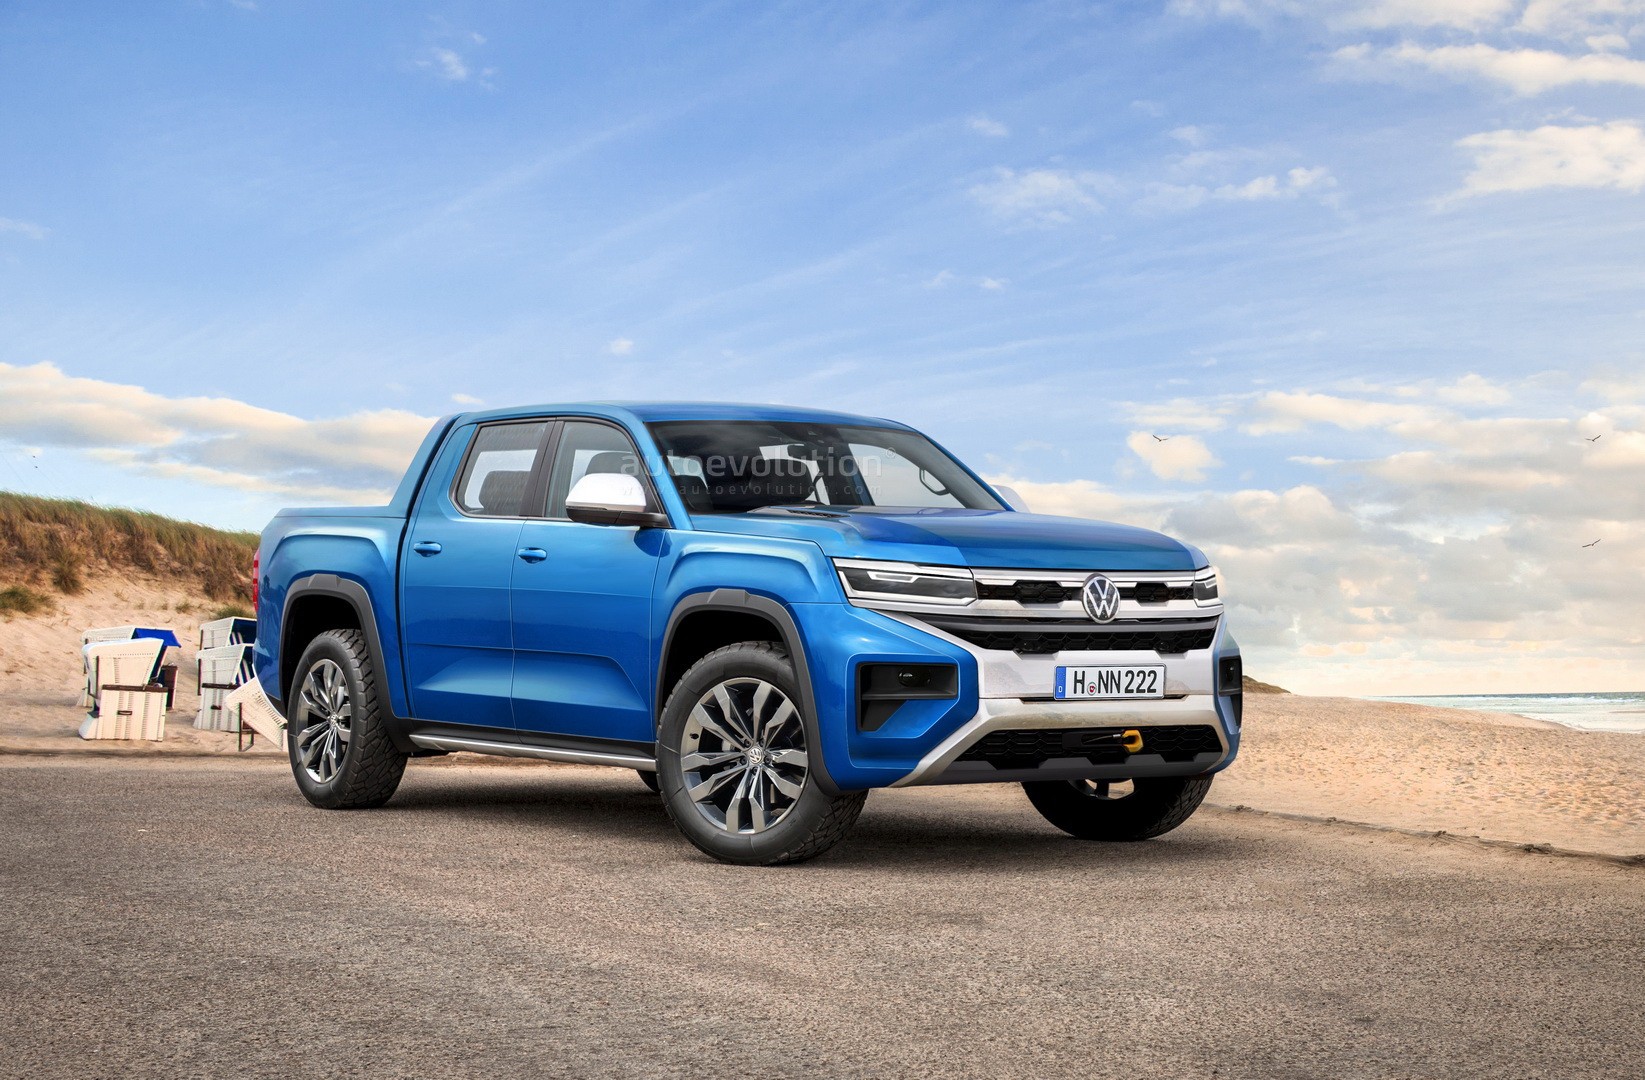 2023 Volkswagen Amarok pickup truck unveiled with Ford architecture -  Details here - autoX